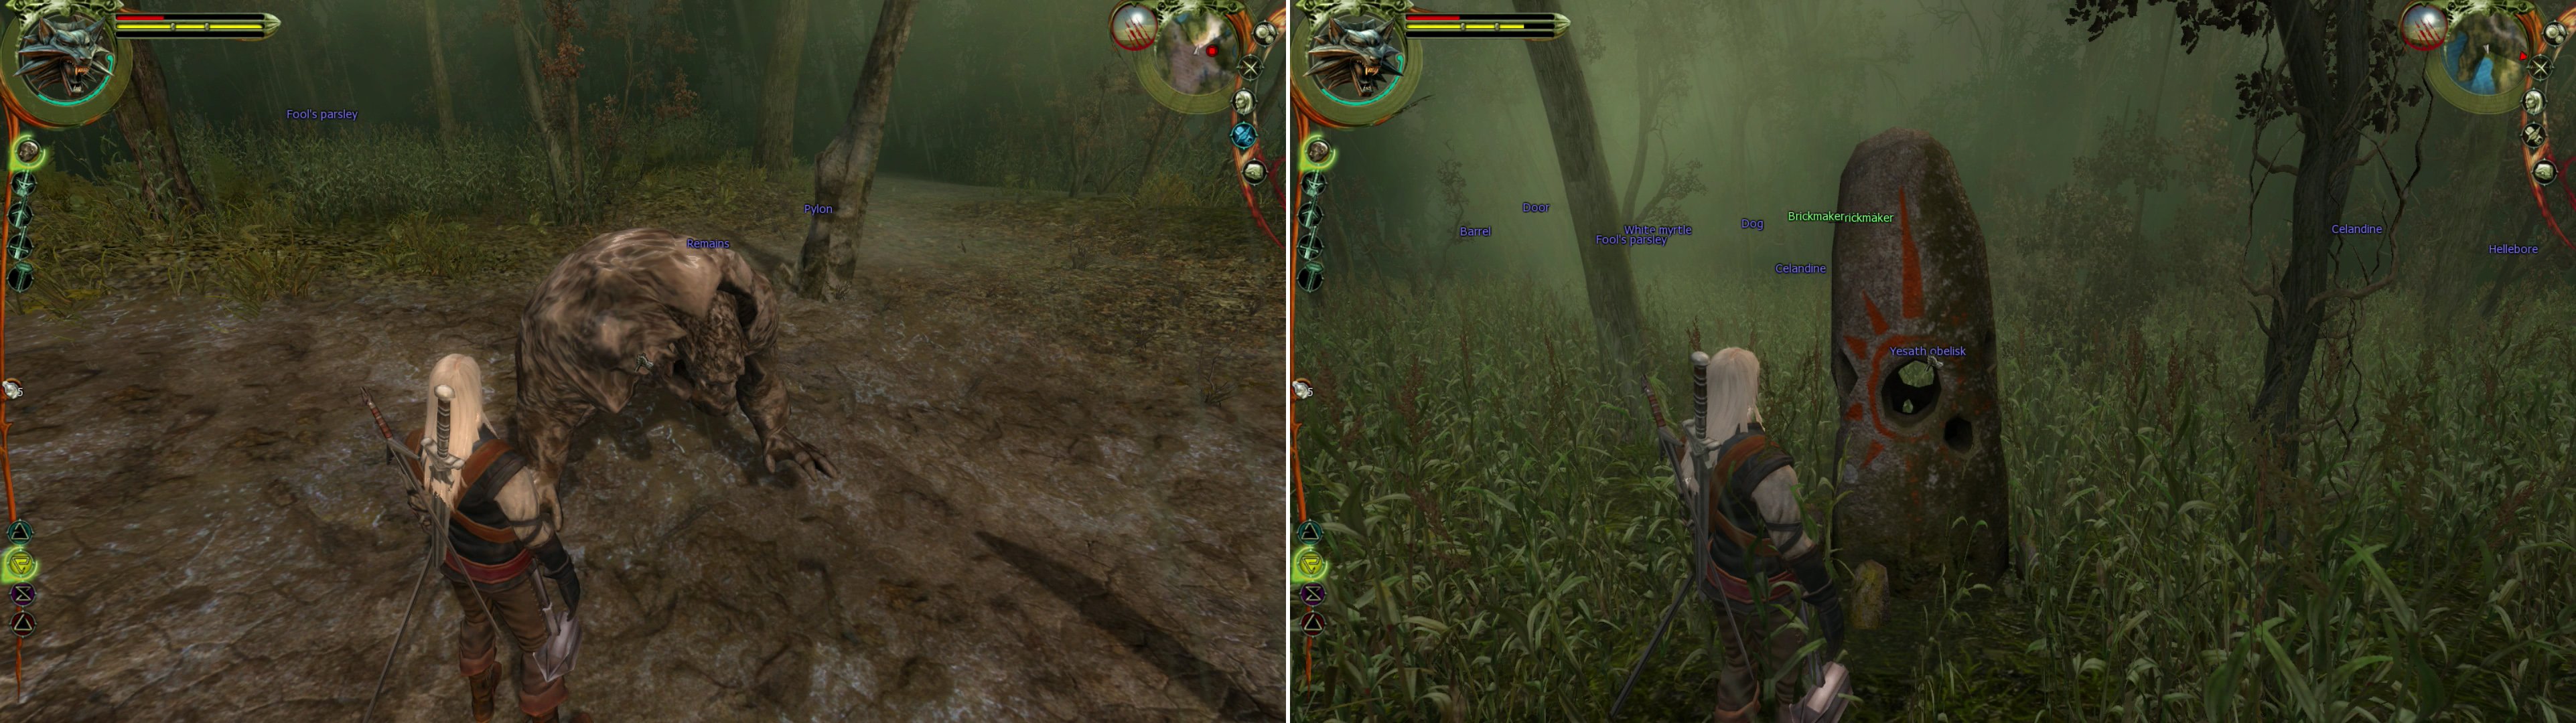 Loot the Golem after defeating it (left) then place all ten Sephirot in the correct Obelisks scattered throughout the Swamp Forest (right).